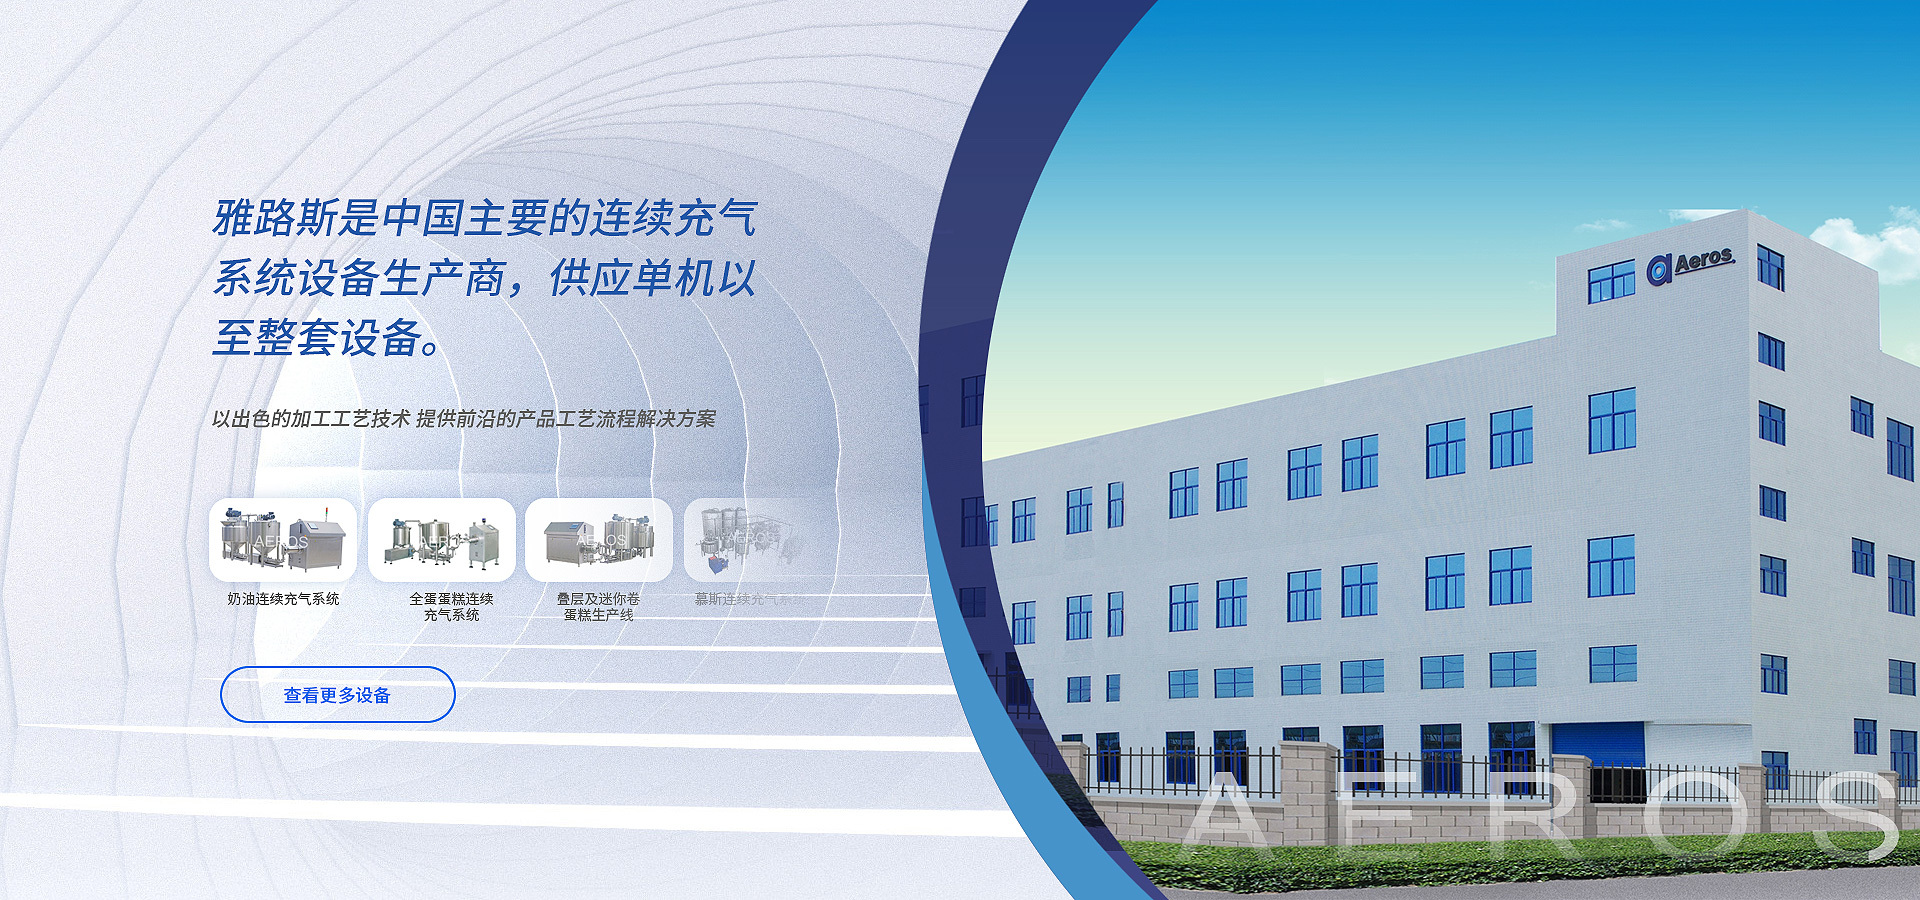 Yalus is incorporated in Guangdong, China: Foshan Yalus Industrial Equipment Co., Ltd.